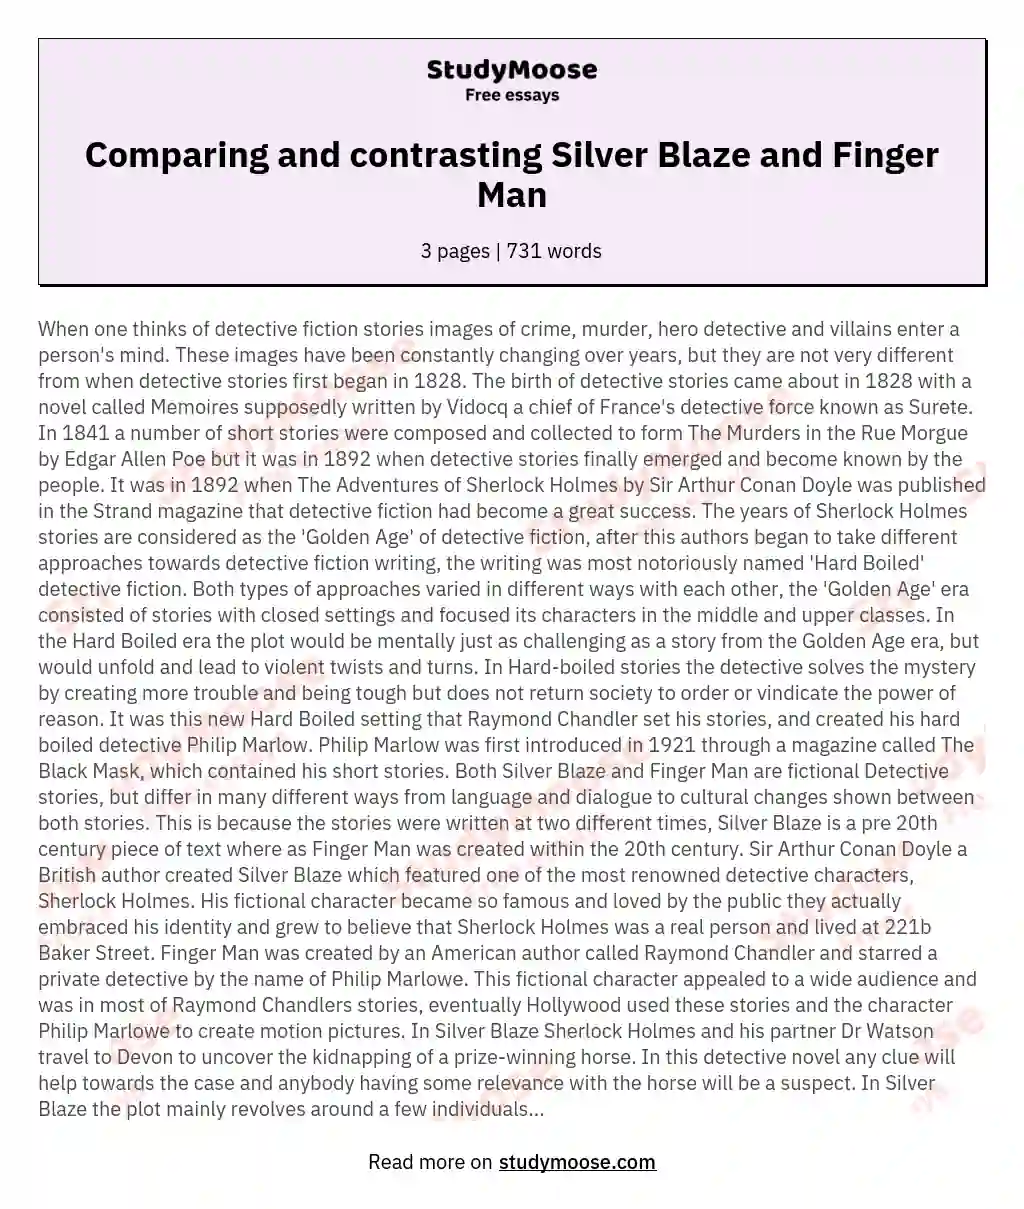 Comparing and contrasting Silver Blaze and Finger Man